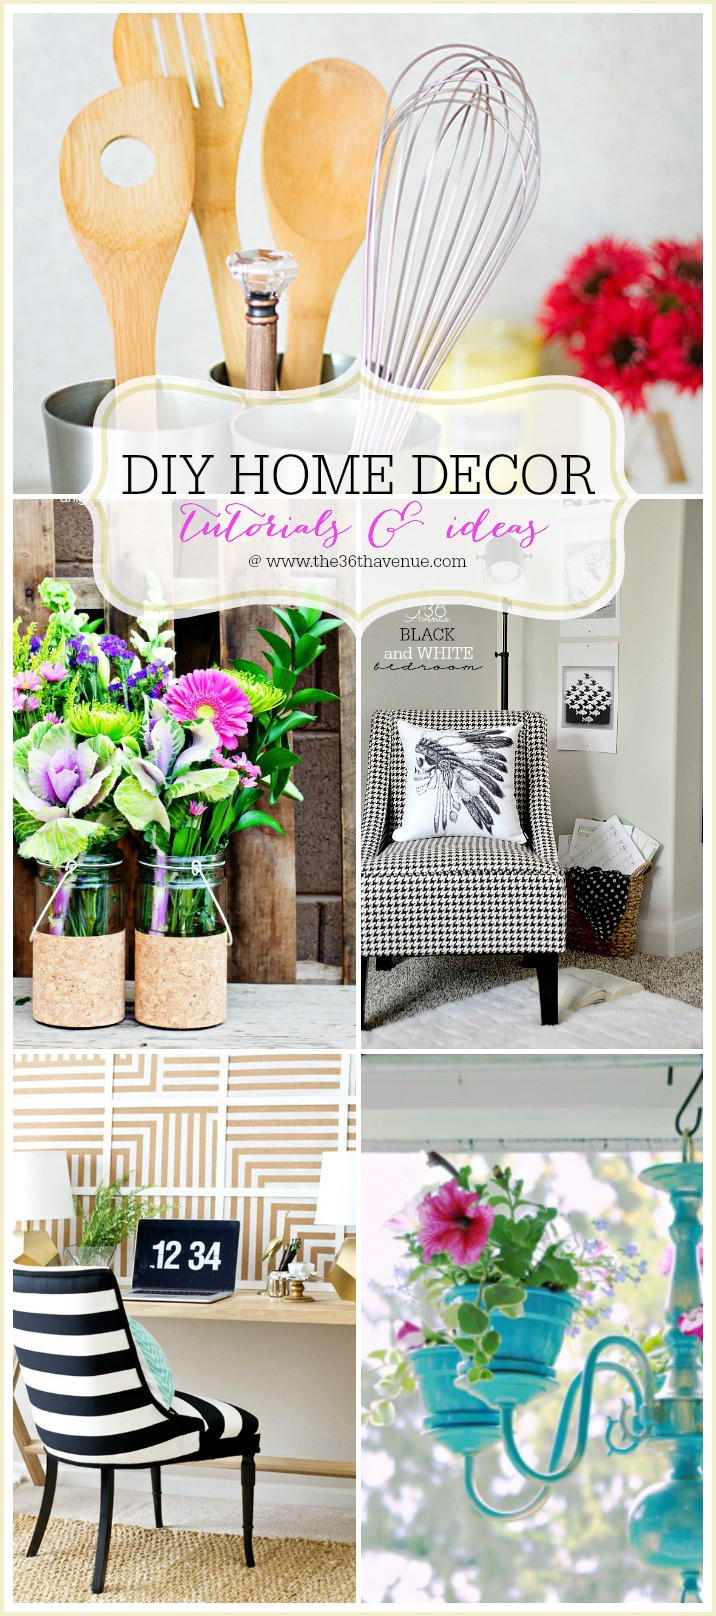 DIY Crafts Ideas For Home Decor
 The 36th AVENUE Home Decor DIY Projects